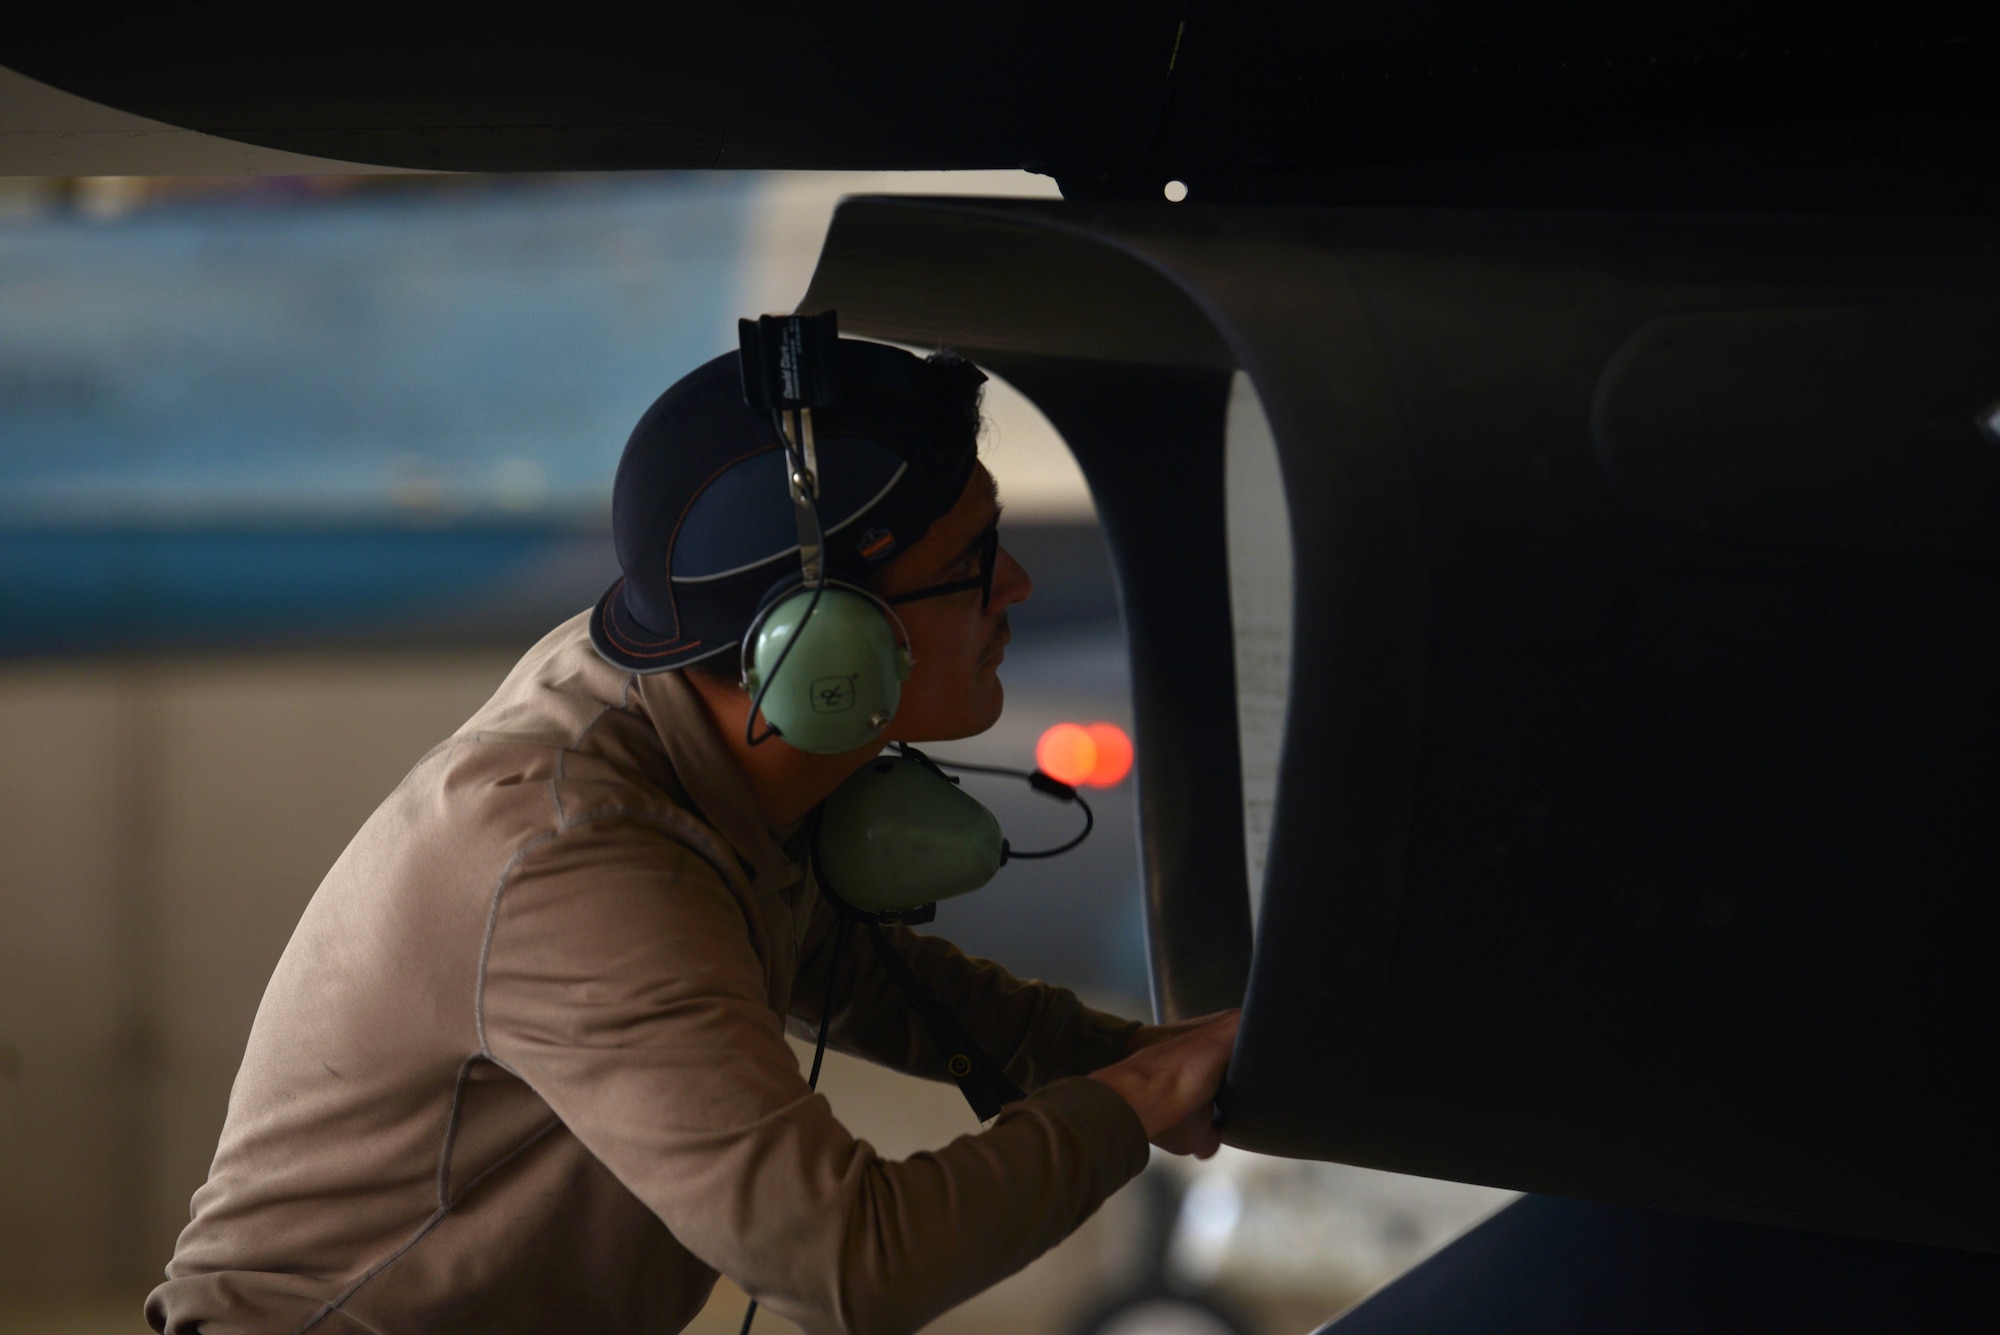 U.S. Air Force Airman 1st Class Jacob Camacho, an 18th Aircraft Maintenance Unit (AMU) crew chief, inspects an F-16 Fighting Falcon air intake during RED FLAG-Alaska 20-3 on Eielson Air Force Base, Alaska, Aug. 4, 2020. Prior to starting up the jet, crew chiefs look for debris that could potentially create a safety hazard. (U.S. Air Force photo by Senior Airman Beaux Hebert)